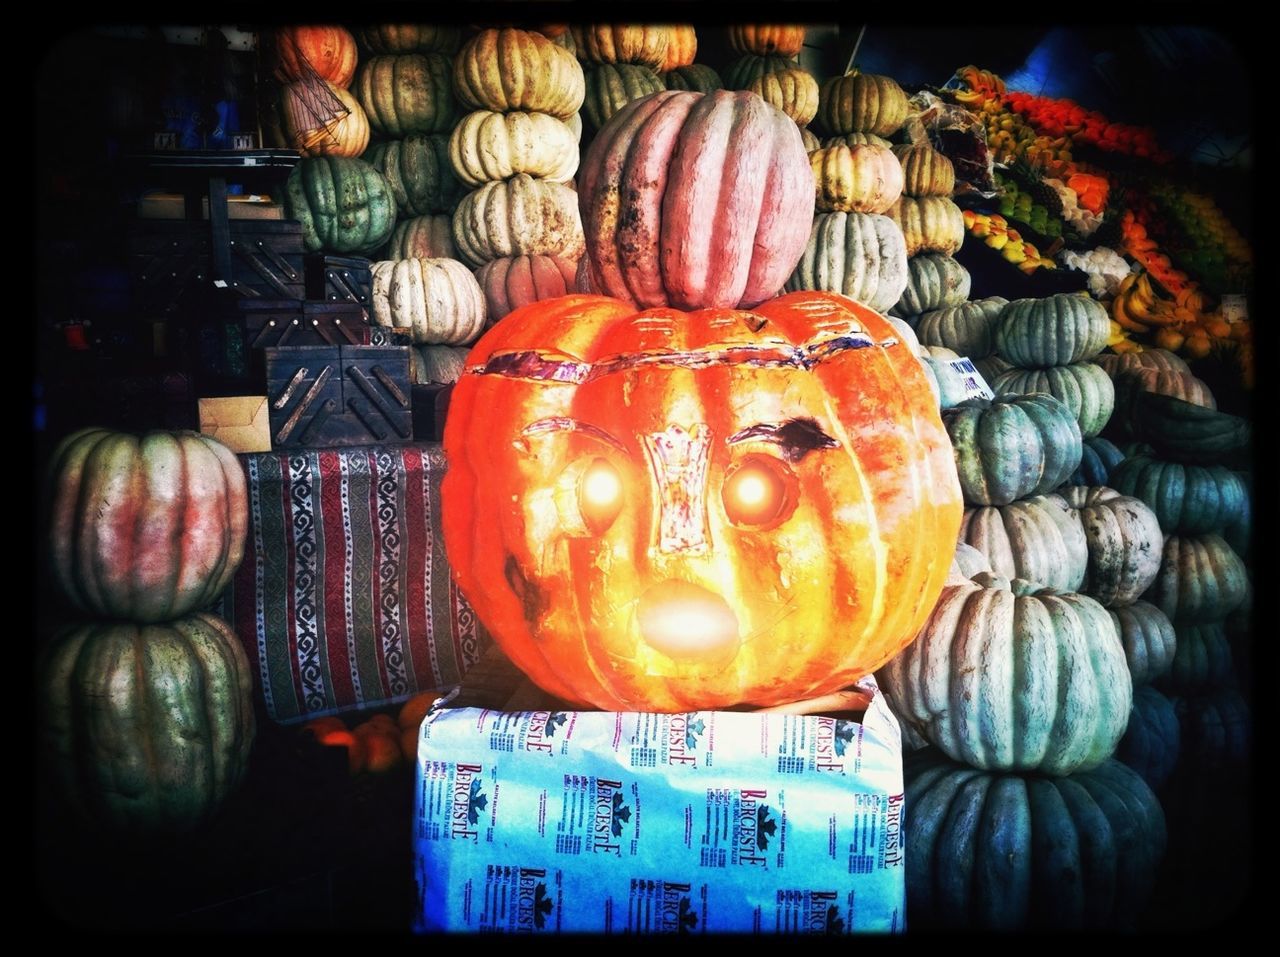 transfer print, auto post production filter, indoors, pumpkin, for sale, still life, retail, food, food and drink, market, large group of objects, close-up, sale, variation, display, shop, choice, vegetable, halloween, abundance